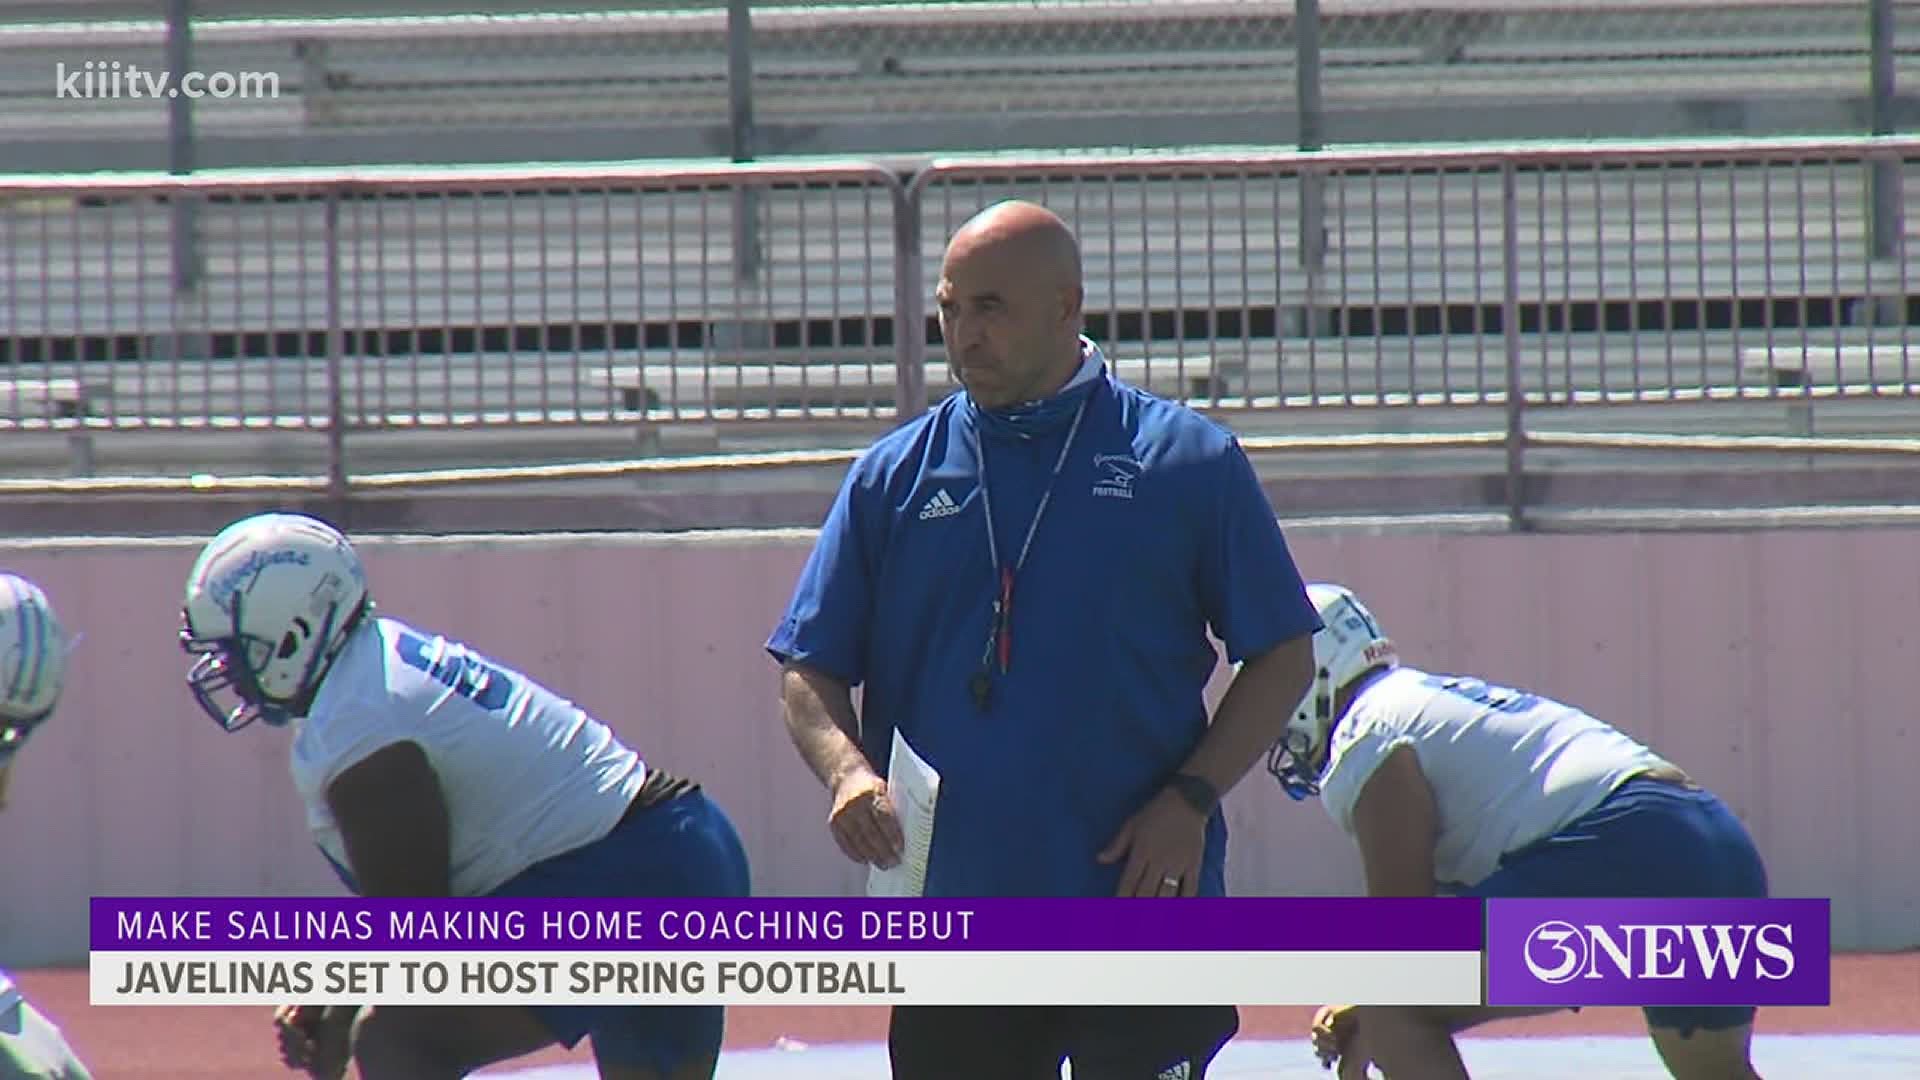 Texas A&M-Kingsville will host UT-Permian Basin Saturday, marking the home debut for Coach Mike Salinas, who was hired in December 2019.